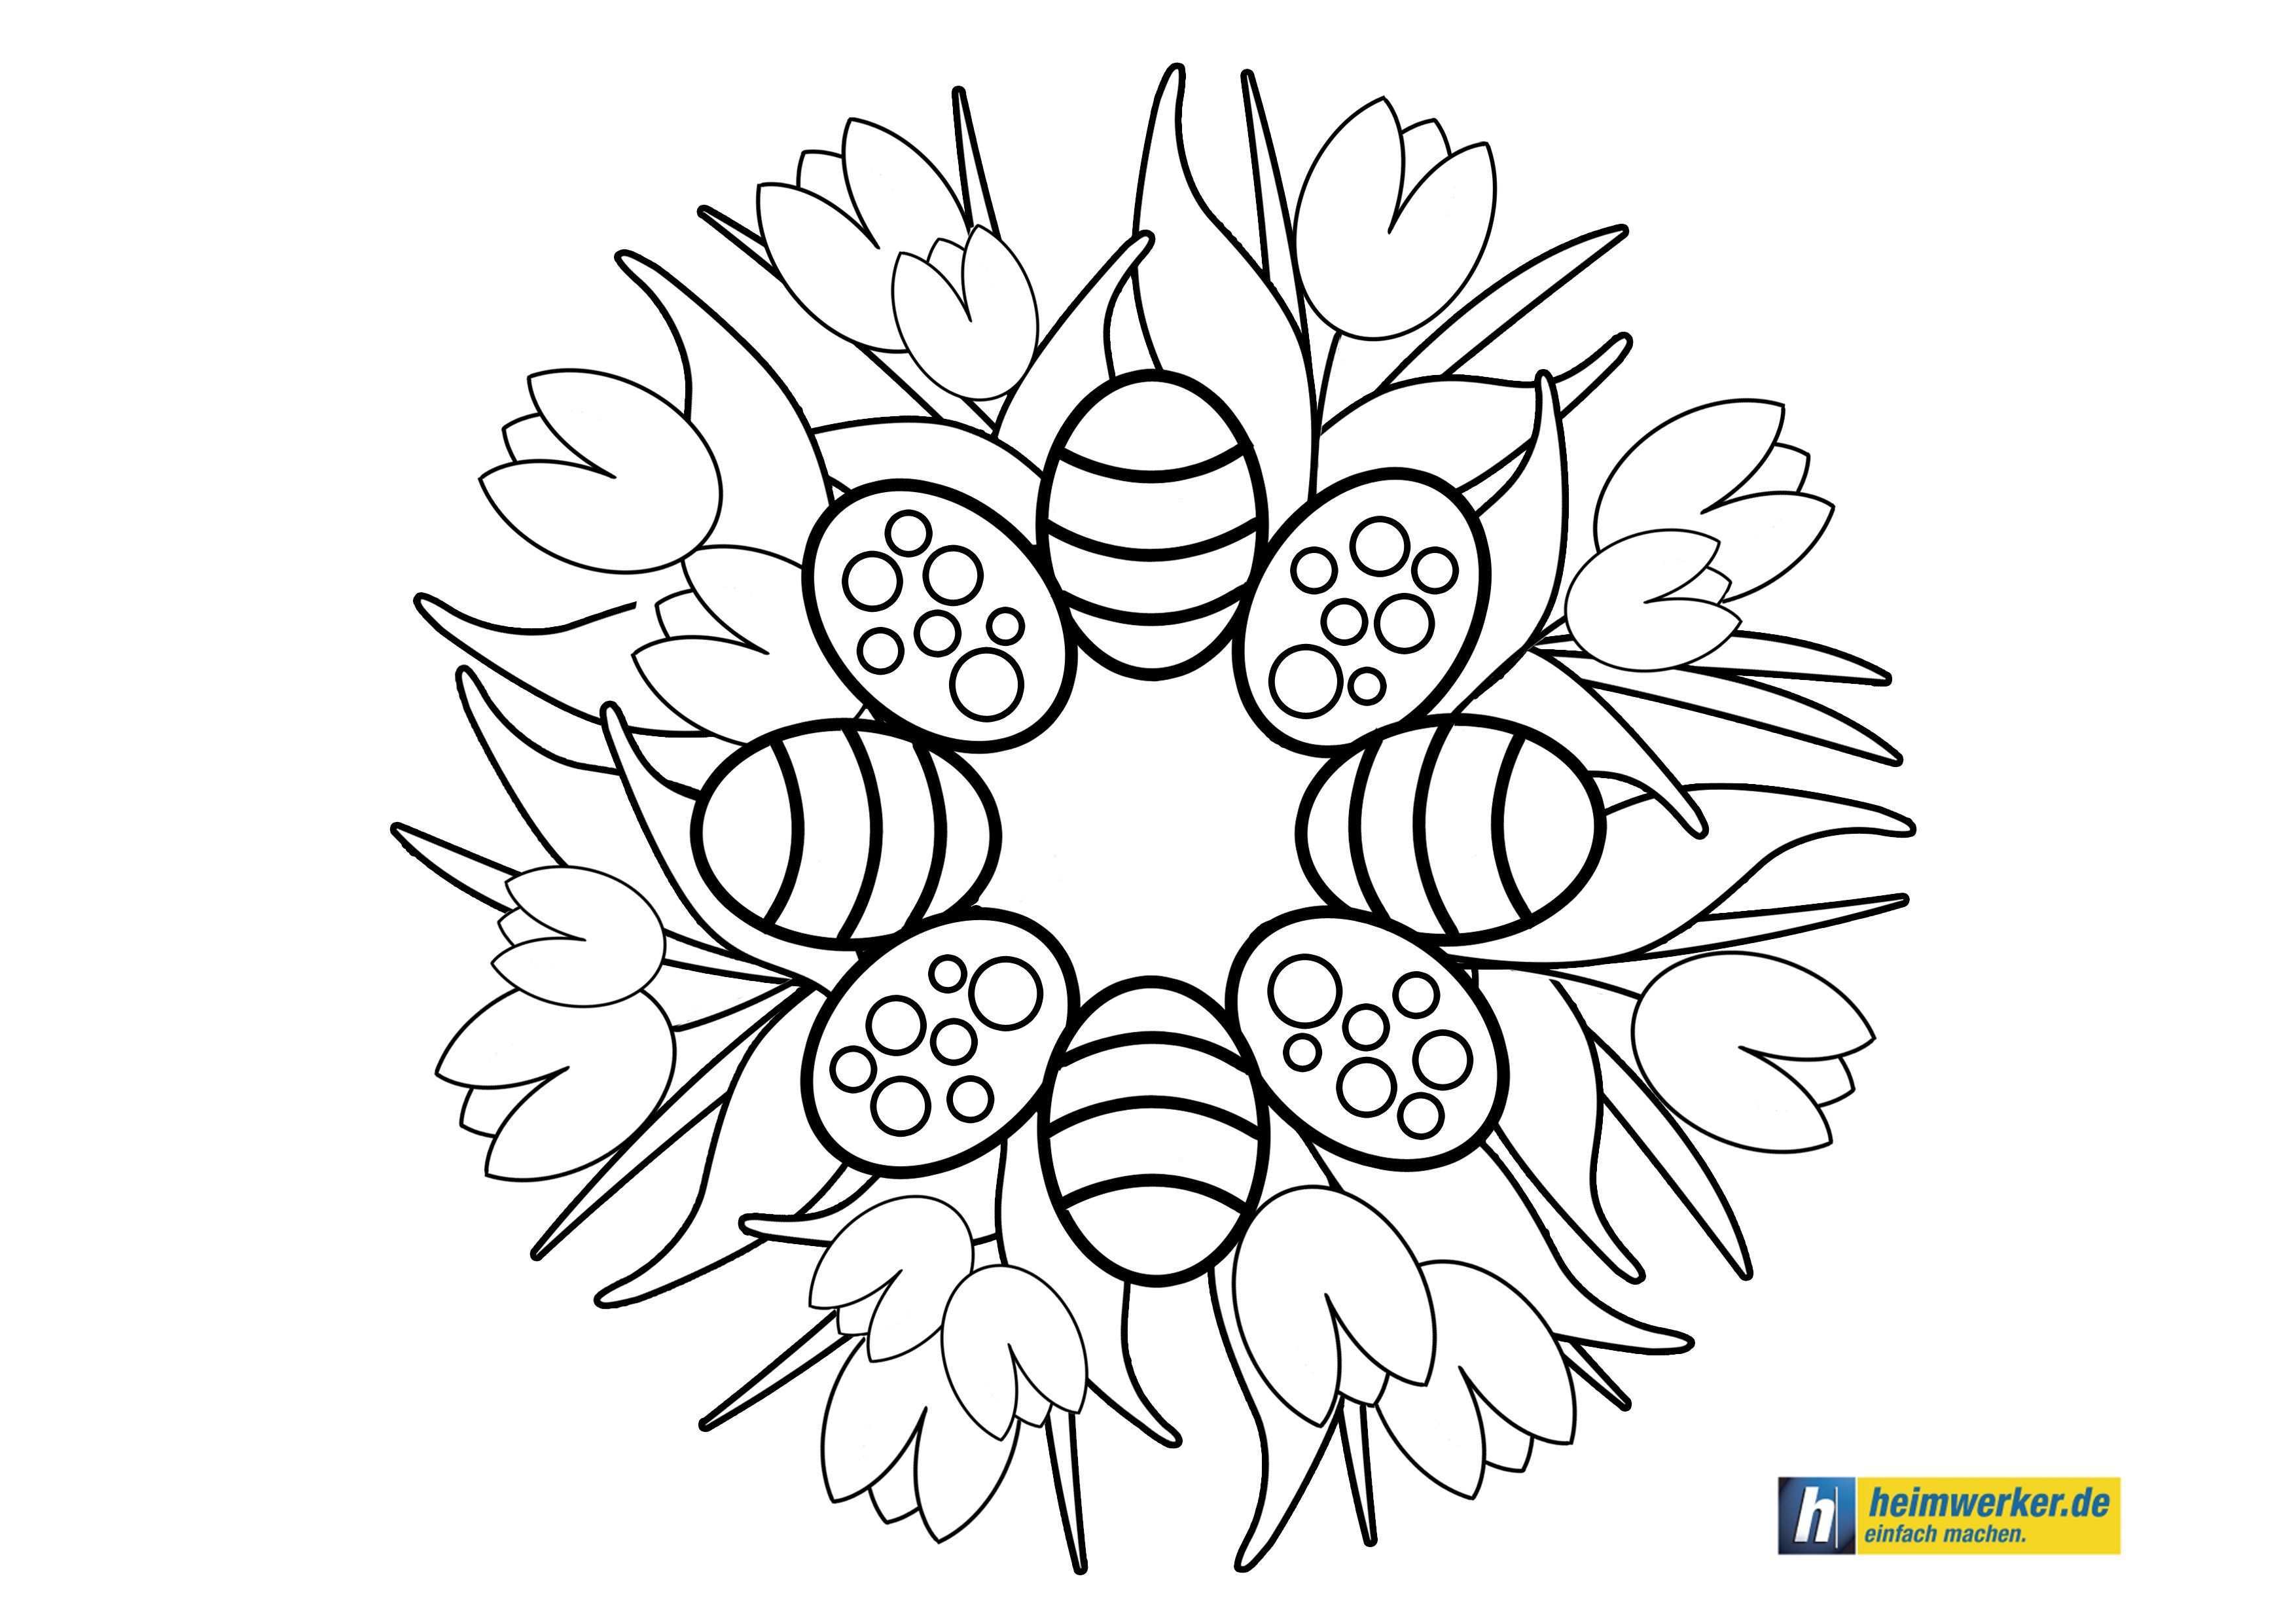 Ausmalbild Osternest Easter Nest Coloring Page Kostenlose Ausmalbilder Ausmalbilder Malvorlagen